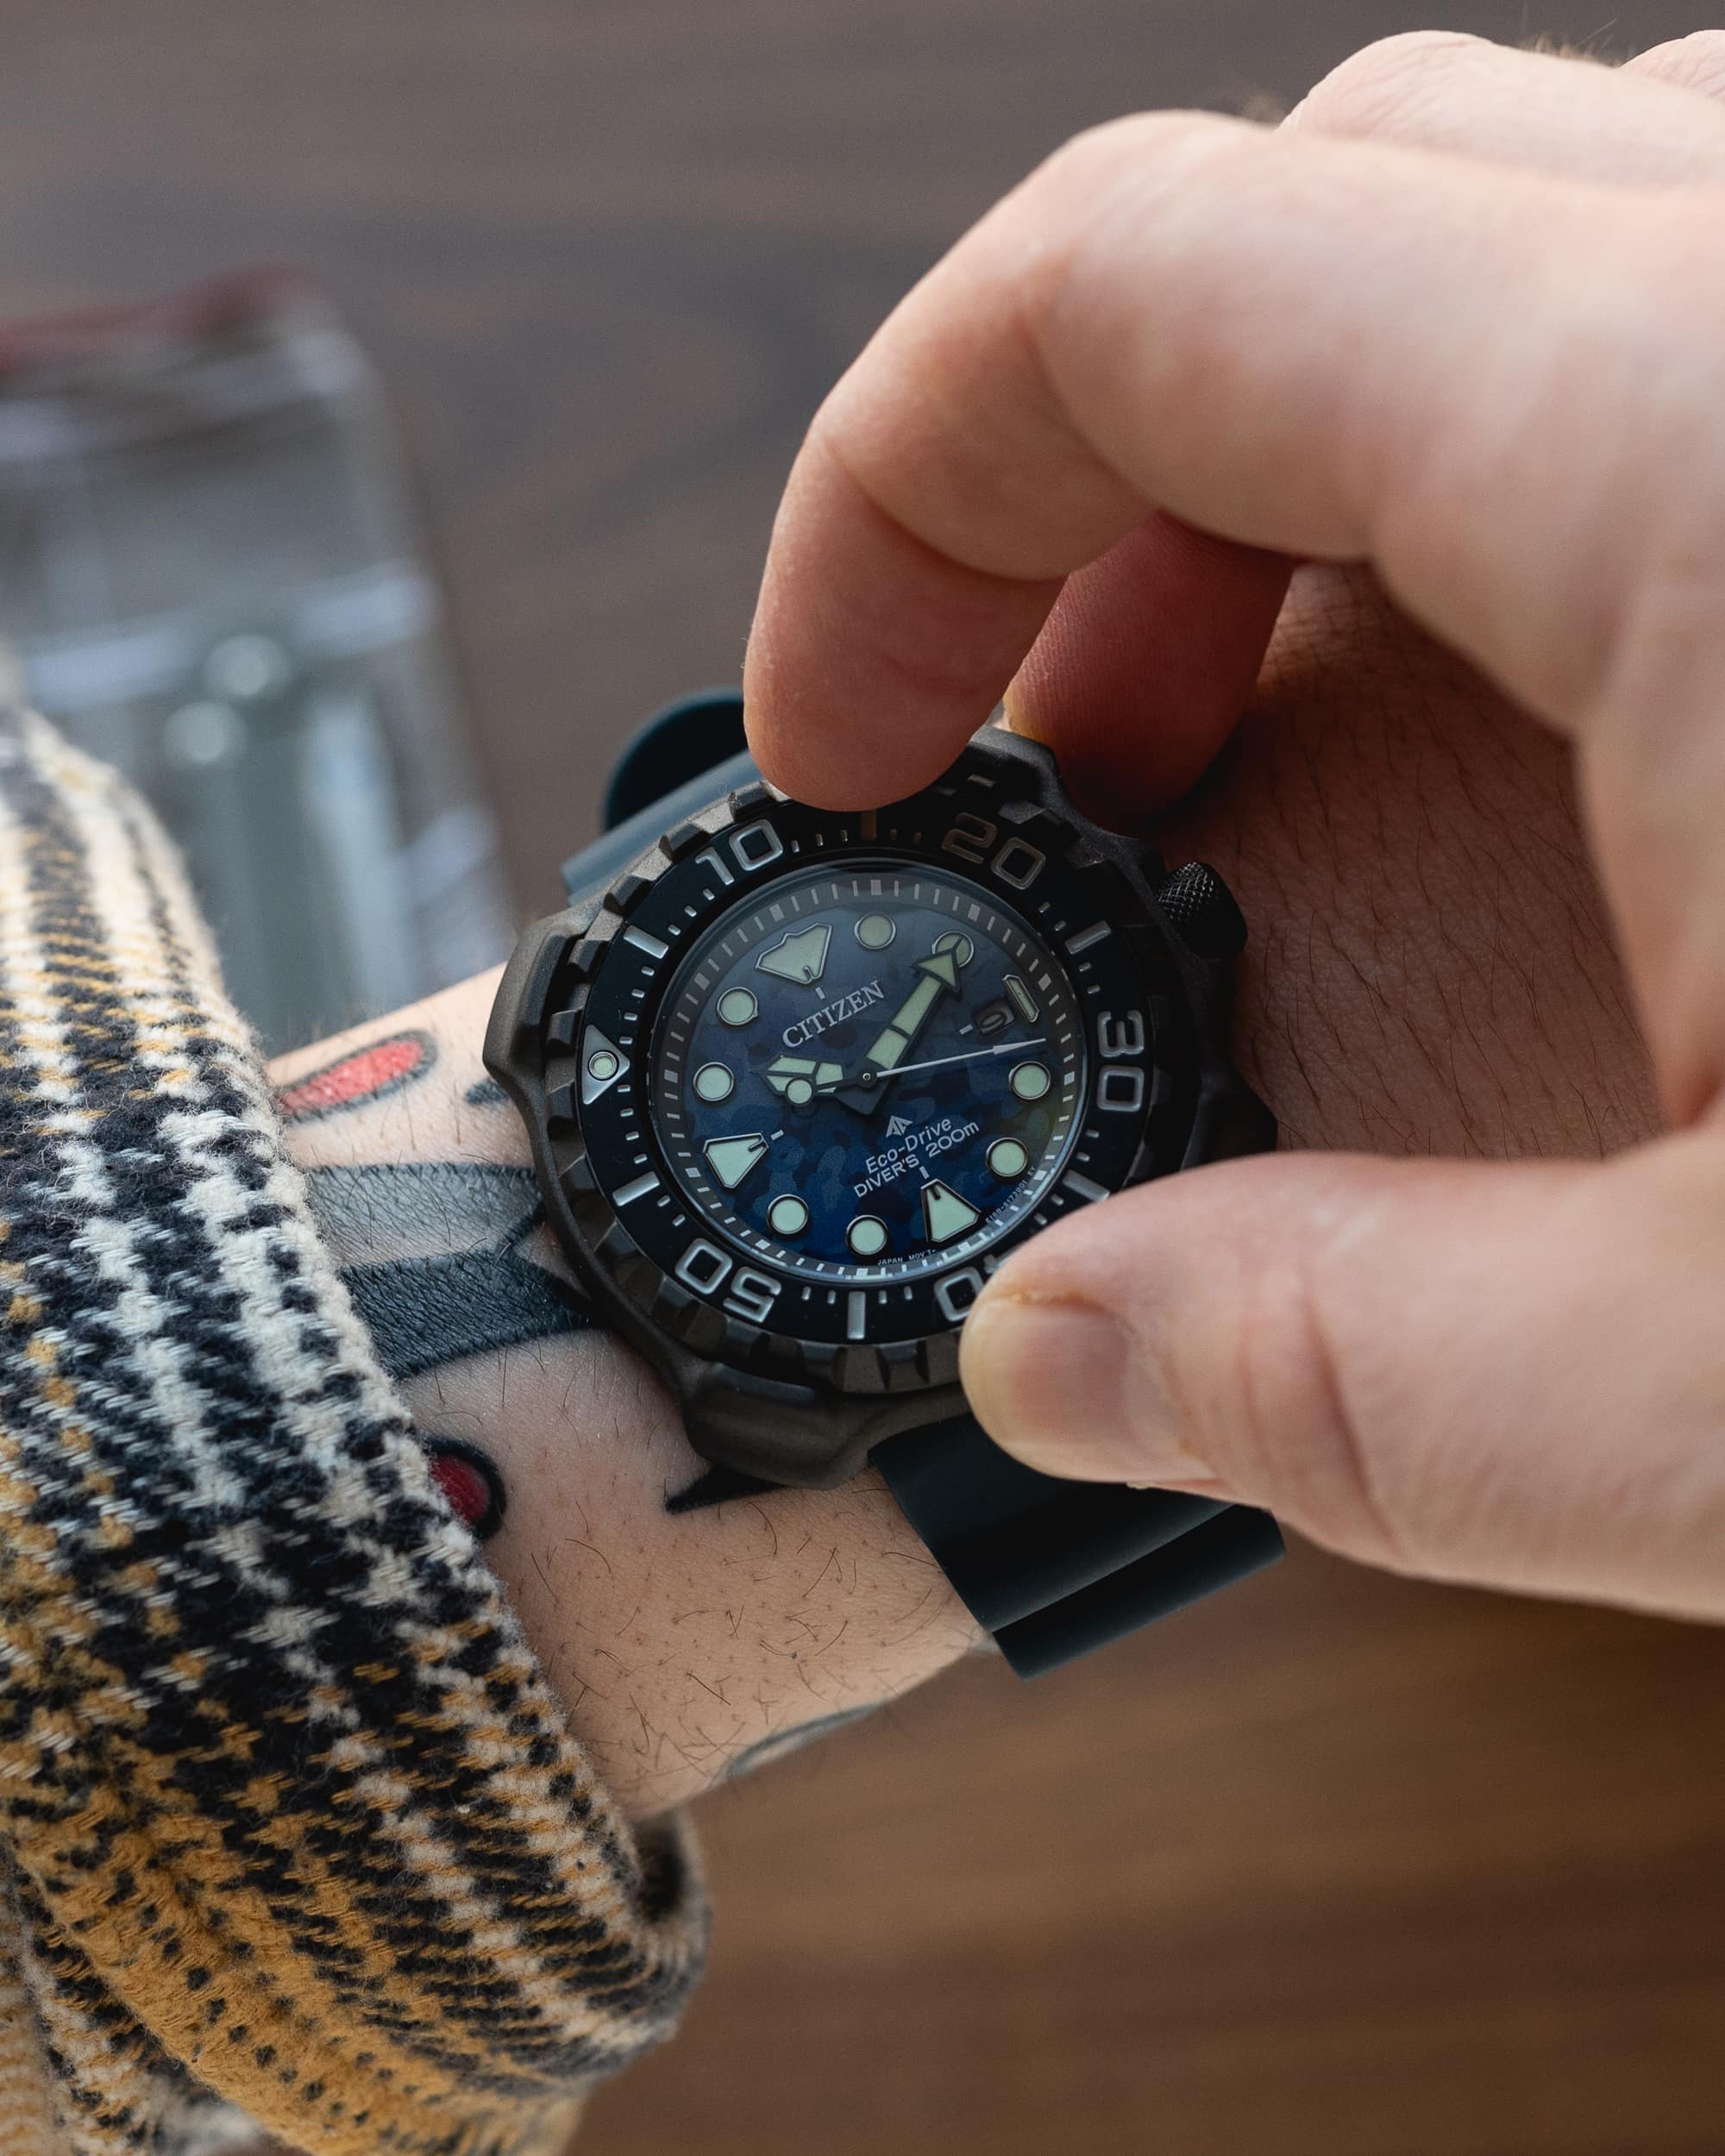 Review: The Assertive Yet Approachable Wound Worn Citizen & Promaster - Diver BN0227-09L